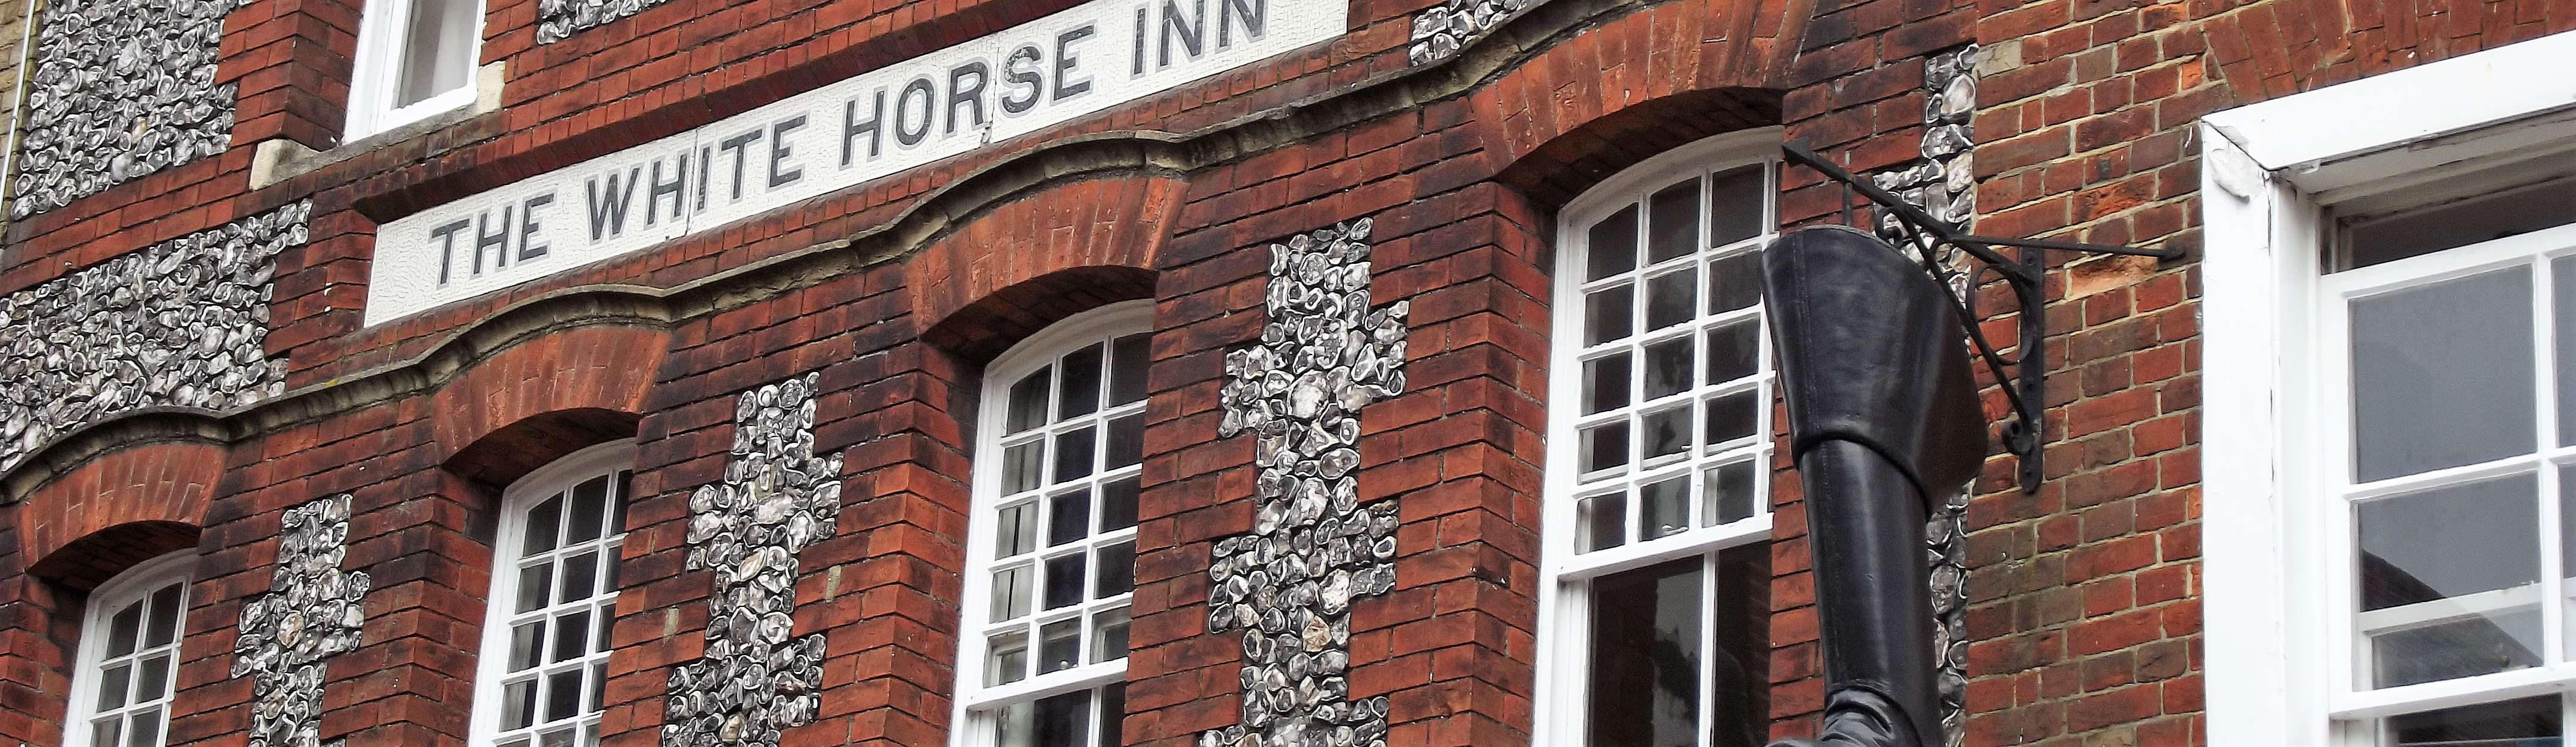 The decorate frontage of the White Horse Inn building in Winchester, built in late C.18